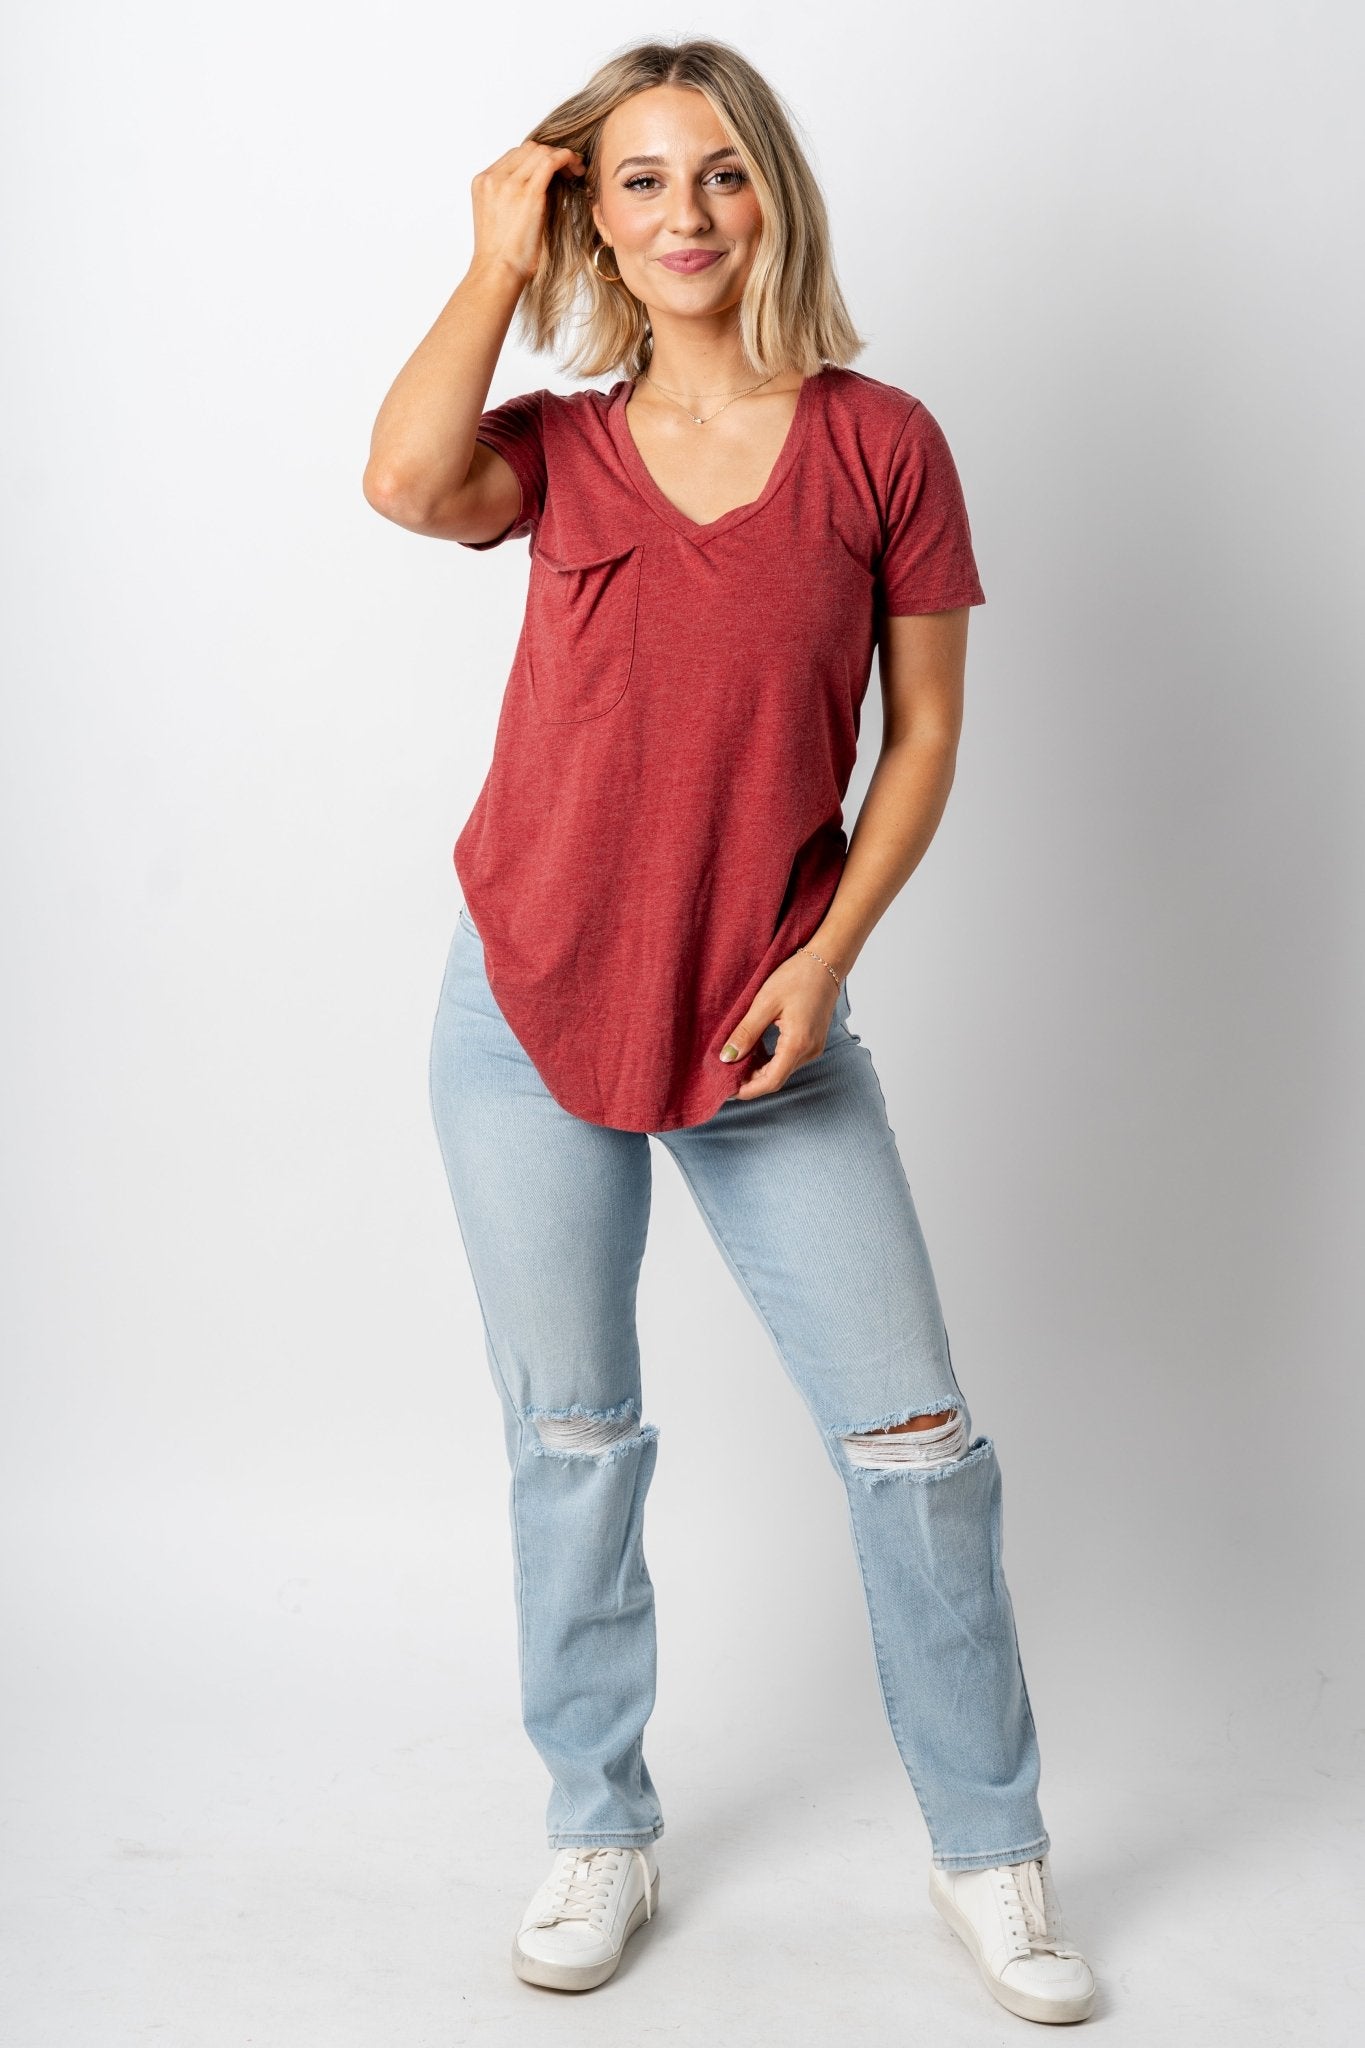 Z Supply pocket tee ruby - Z Supply Top - Z Supply Clothing at Lush Fashion Lounge Trendy Boutique Oklahoma City